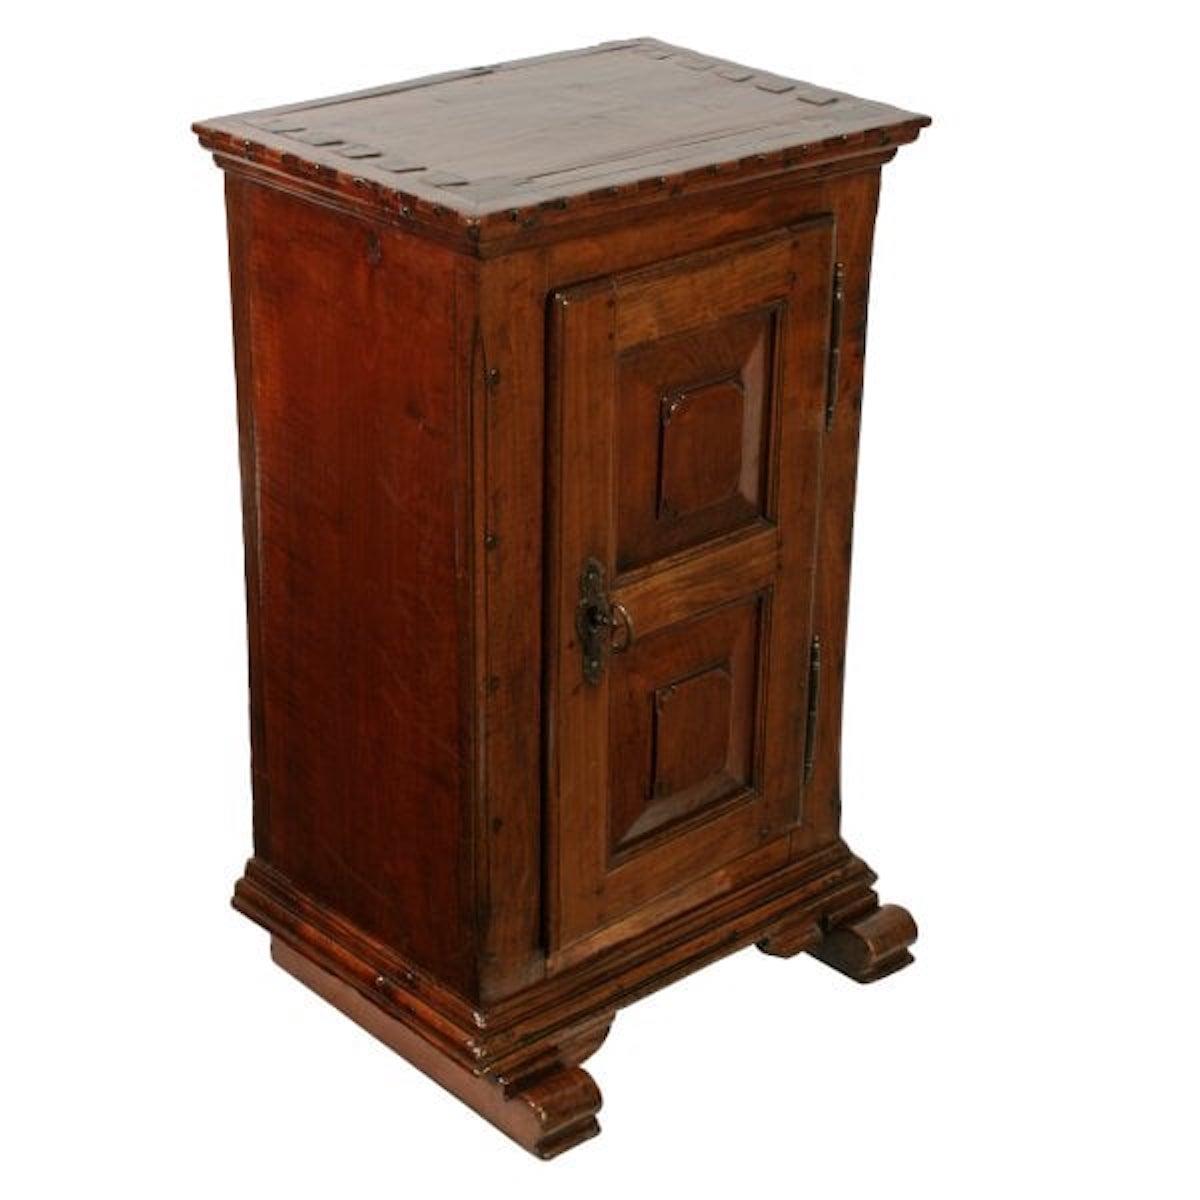 Italian walnut side cabinet

A late 18th to early 19th century Italian (possibly Tuscan) solid walnut side cabinet.

The cabinet has a single door that has raised panels, exposed decorative steel hinges and a keyhole escutcheon.

The cabinet